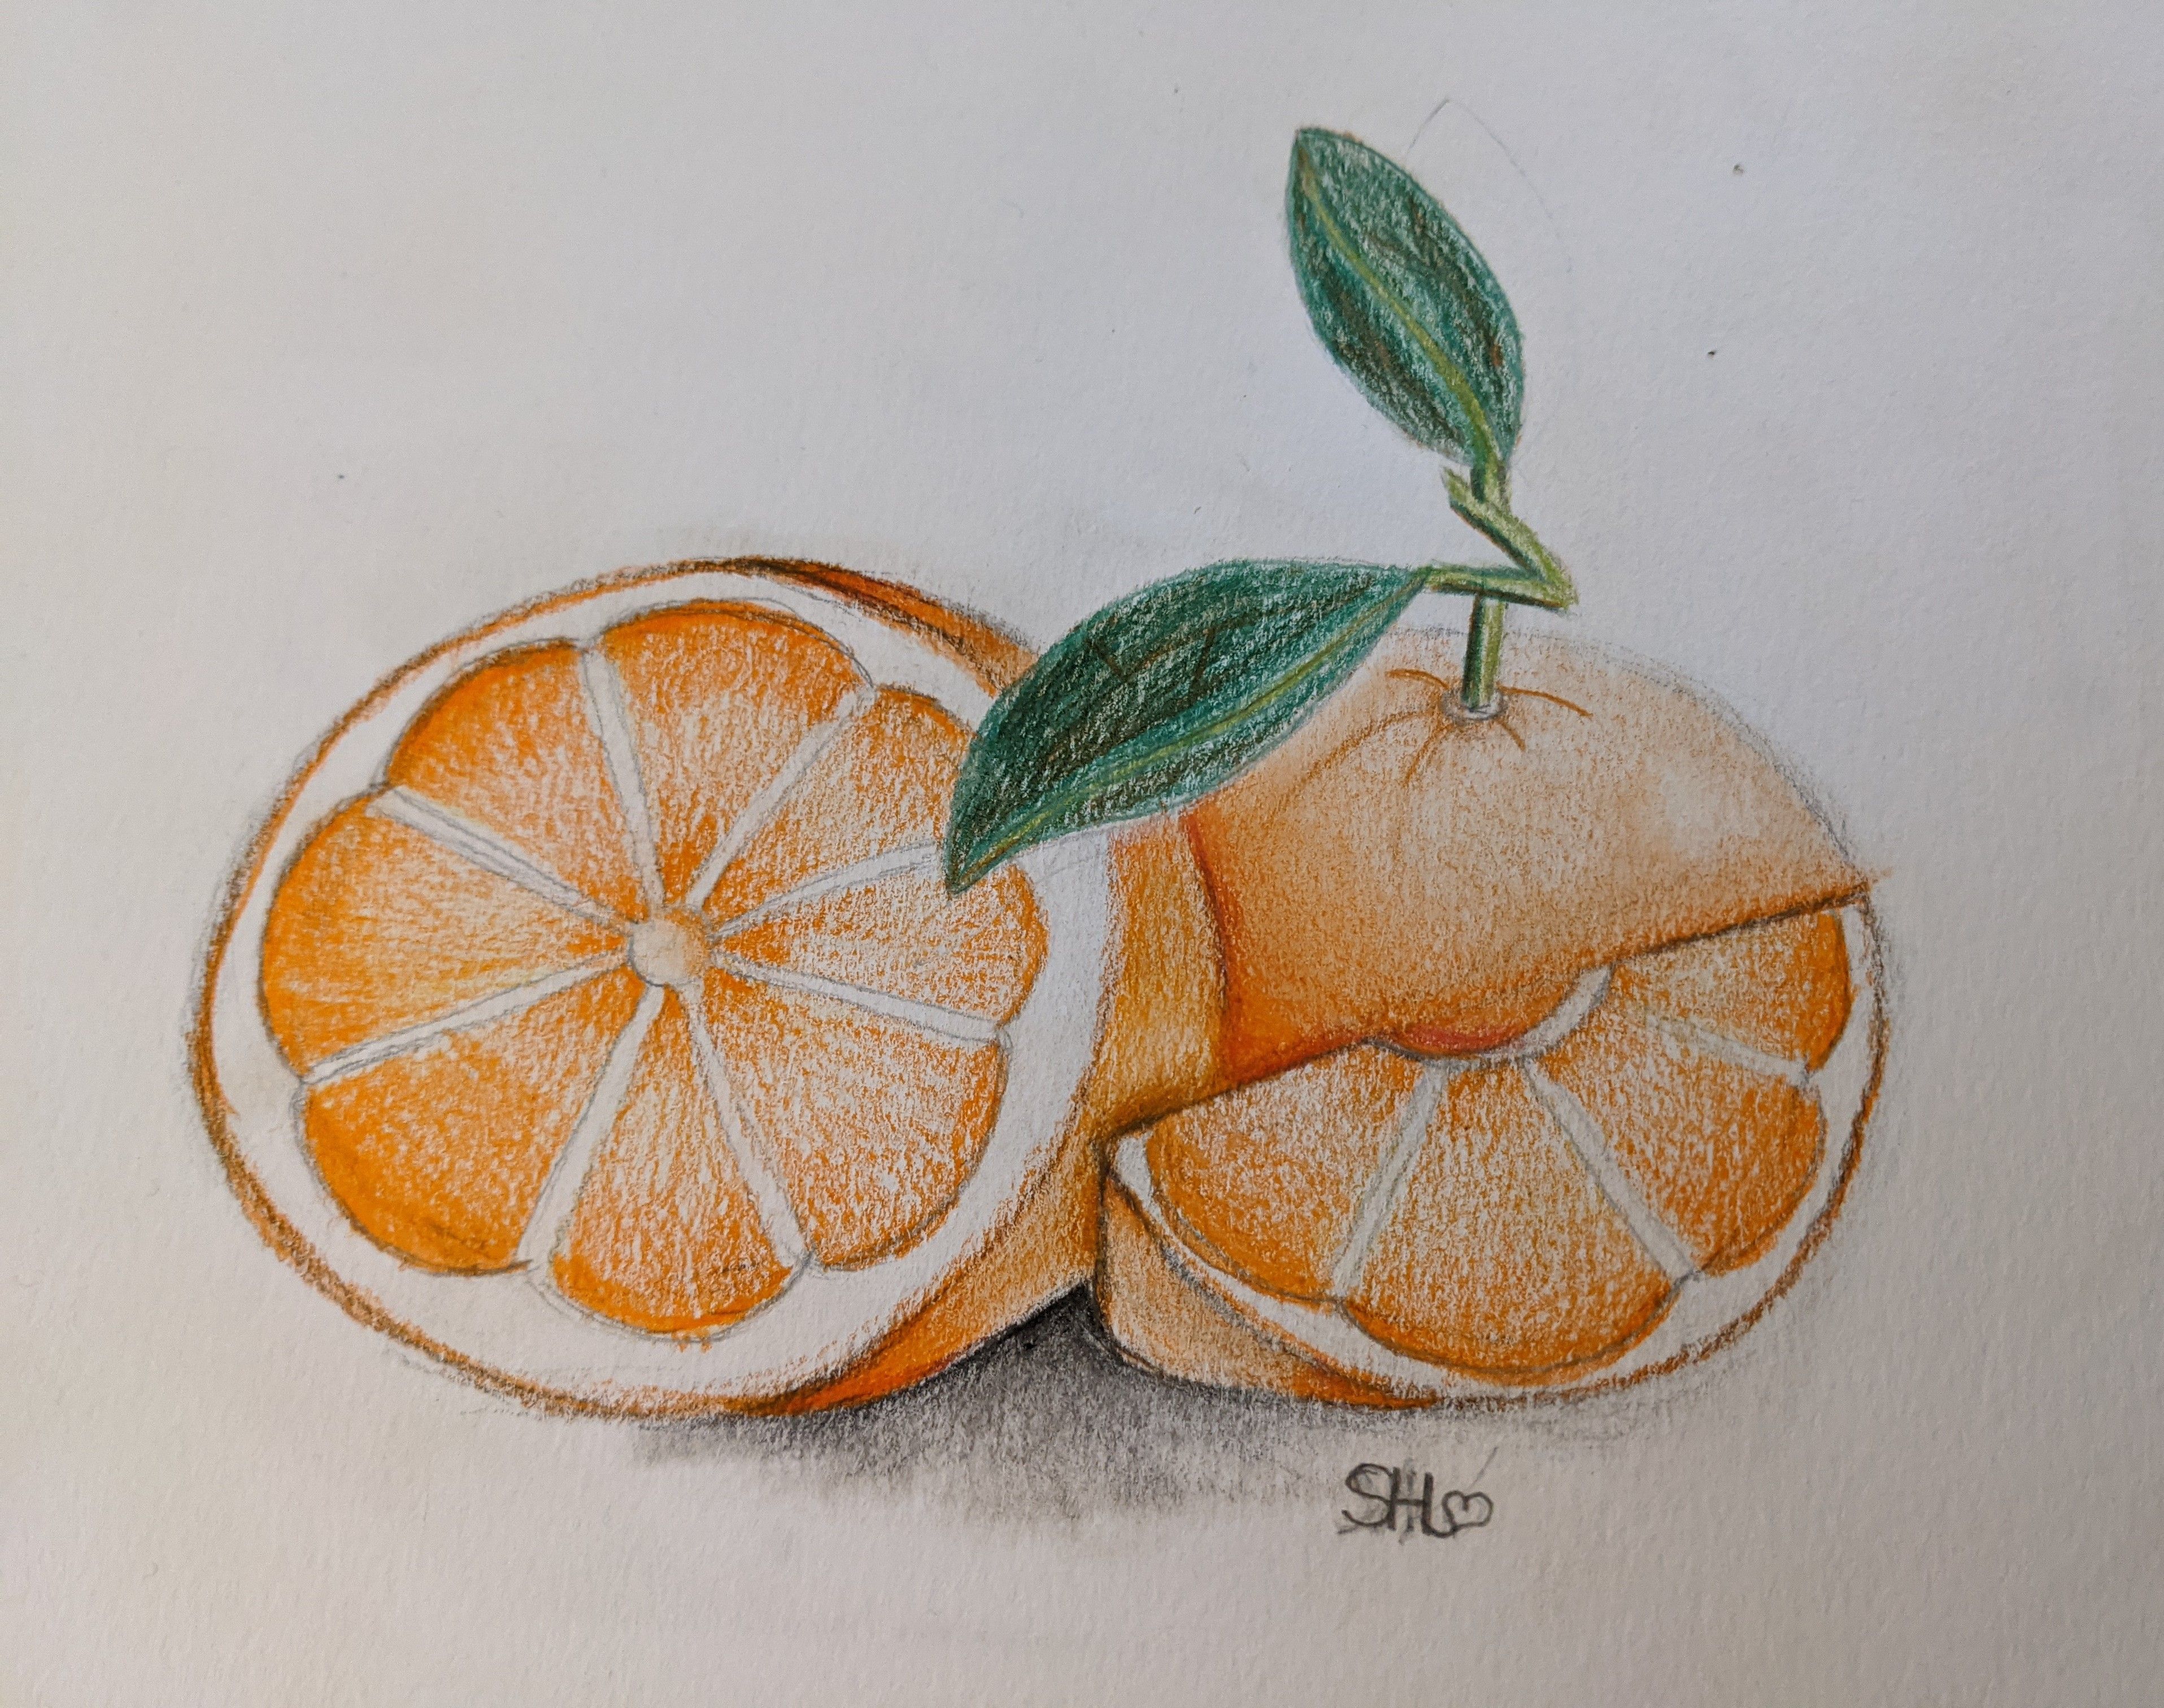 How To Draw And Shade Realistic Fruit Using Colored Pencils Small Online Class For Ages